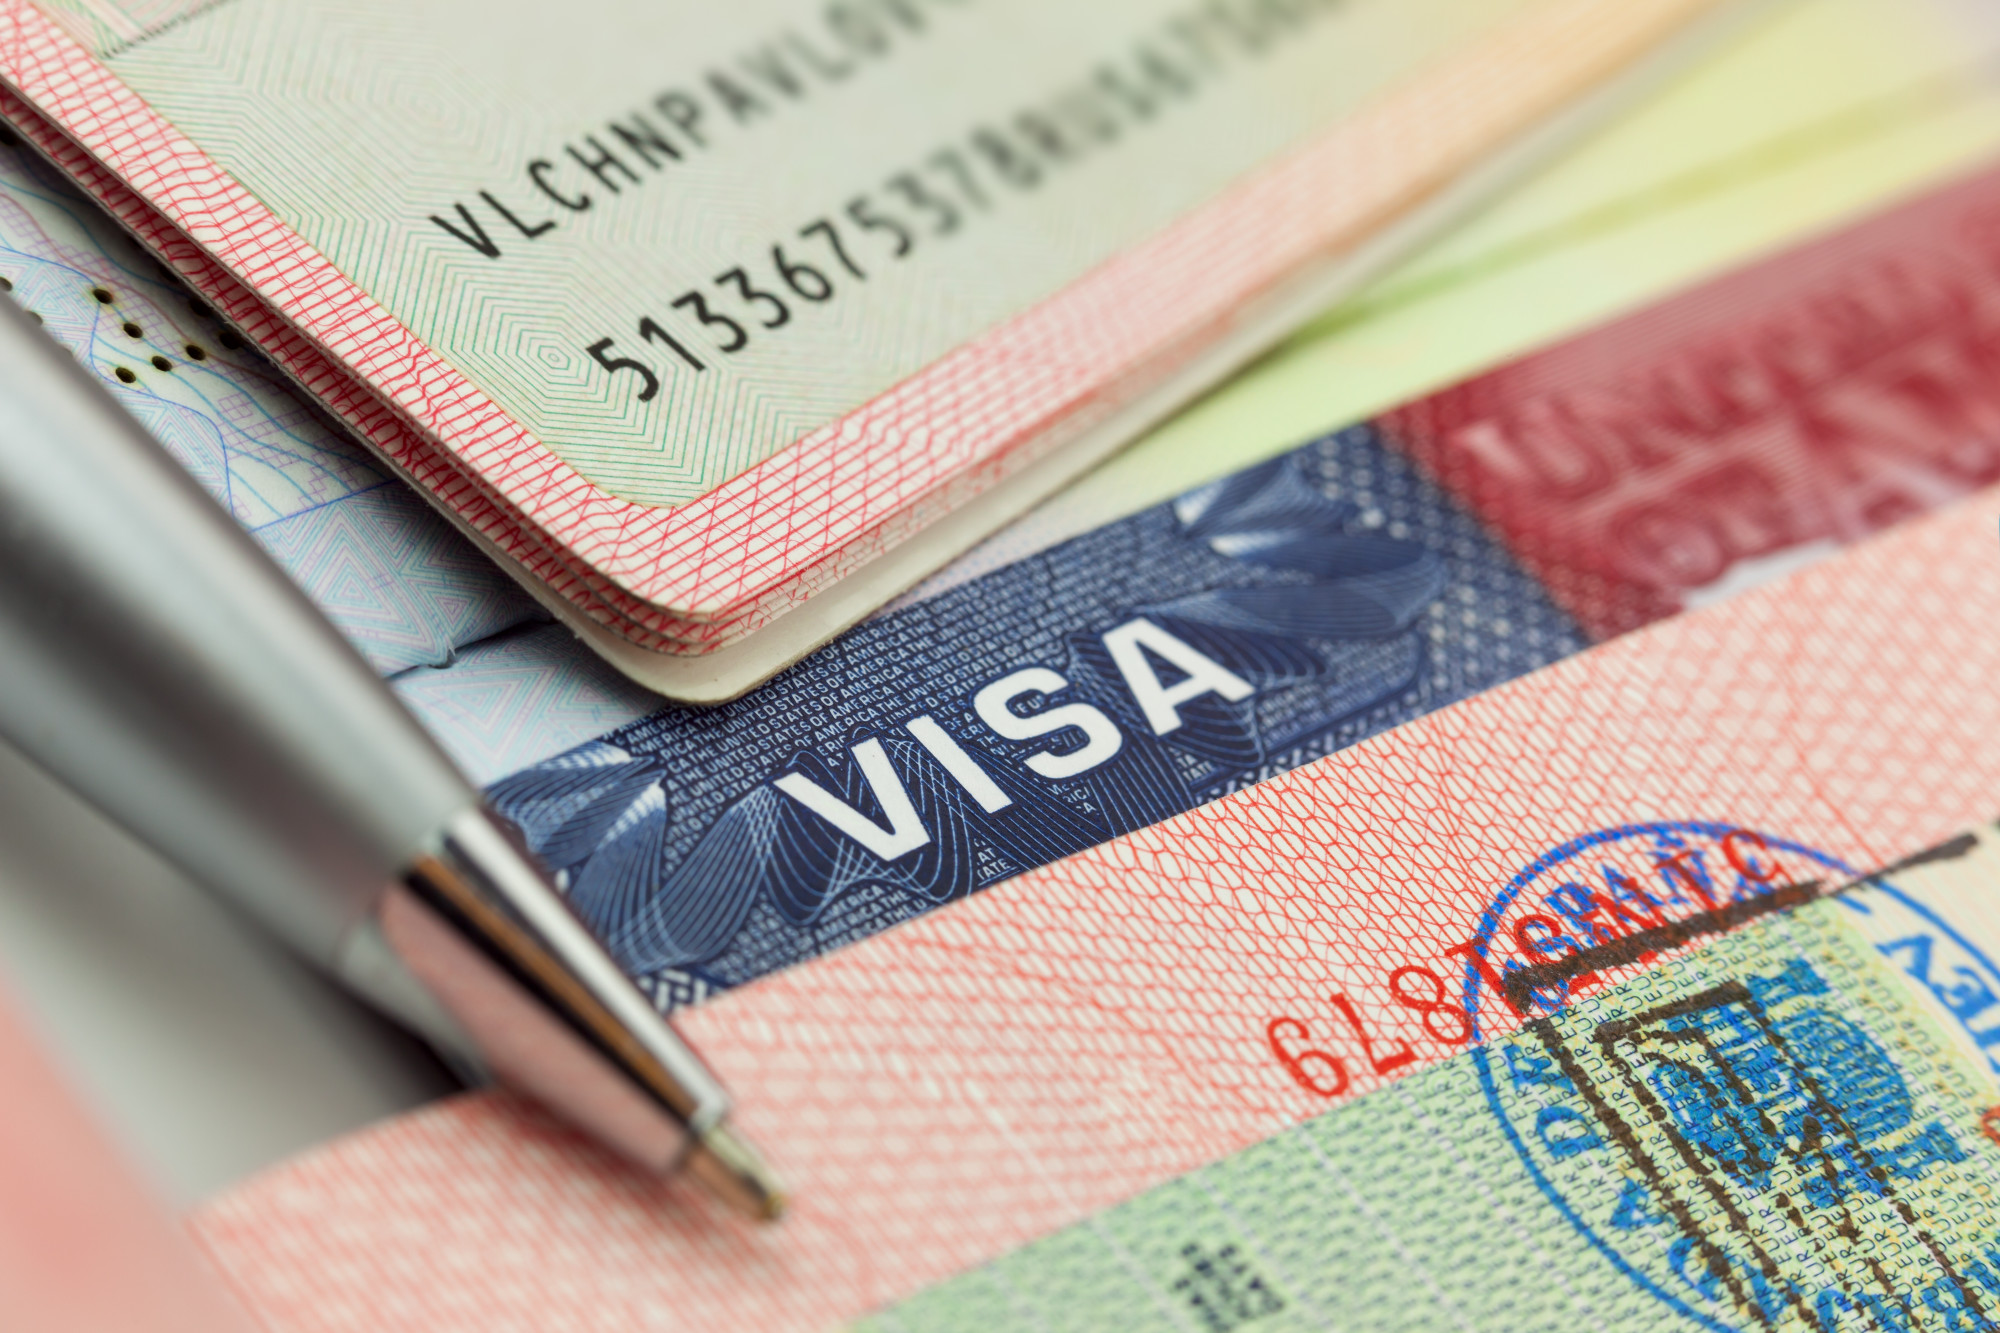 Different visas and stamps in a passport - travel background, E-2 investor visa policies, NDAA